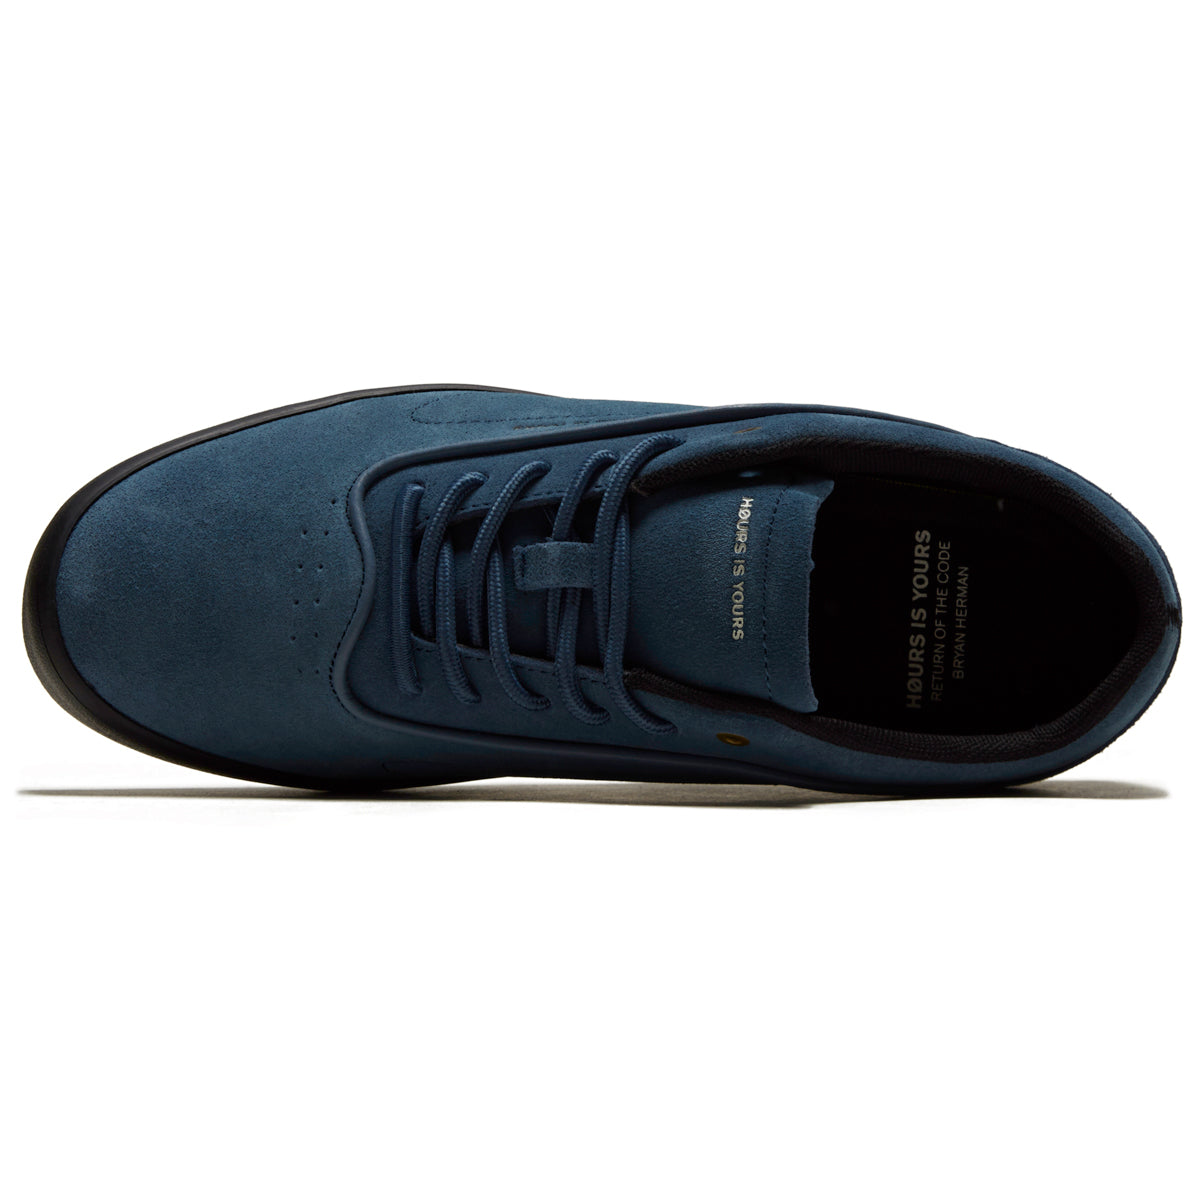 Hours Is Yours Bryan Herman Code Shoes - Modern Blue image 3